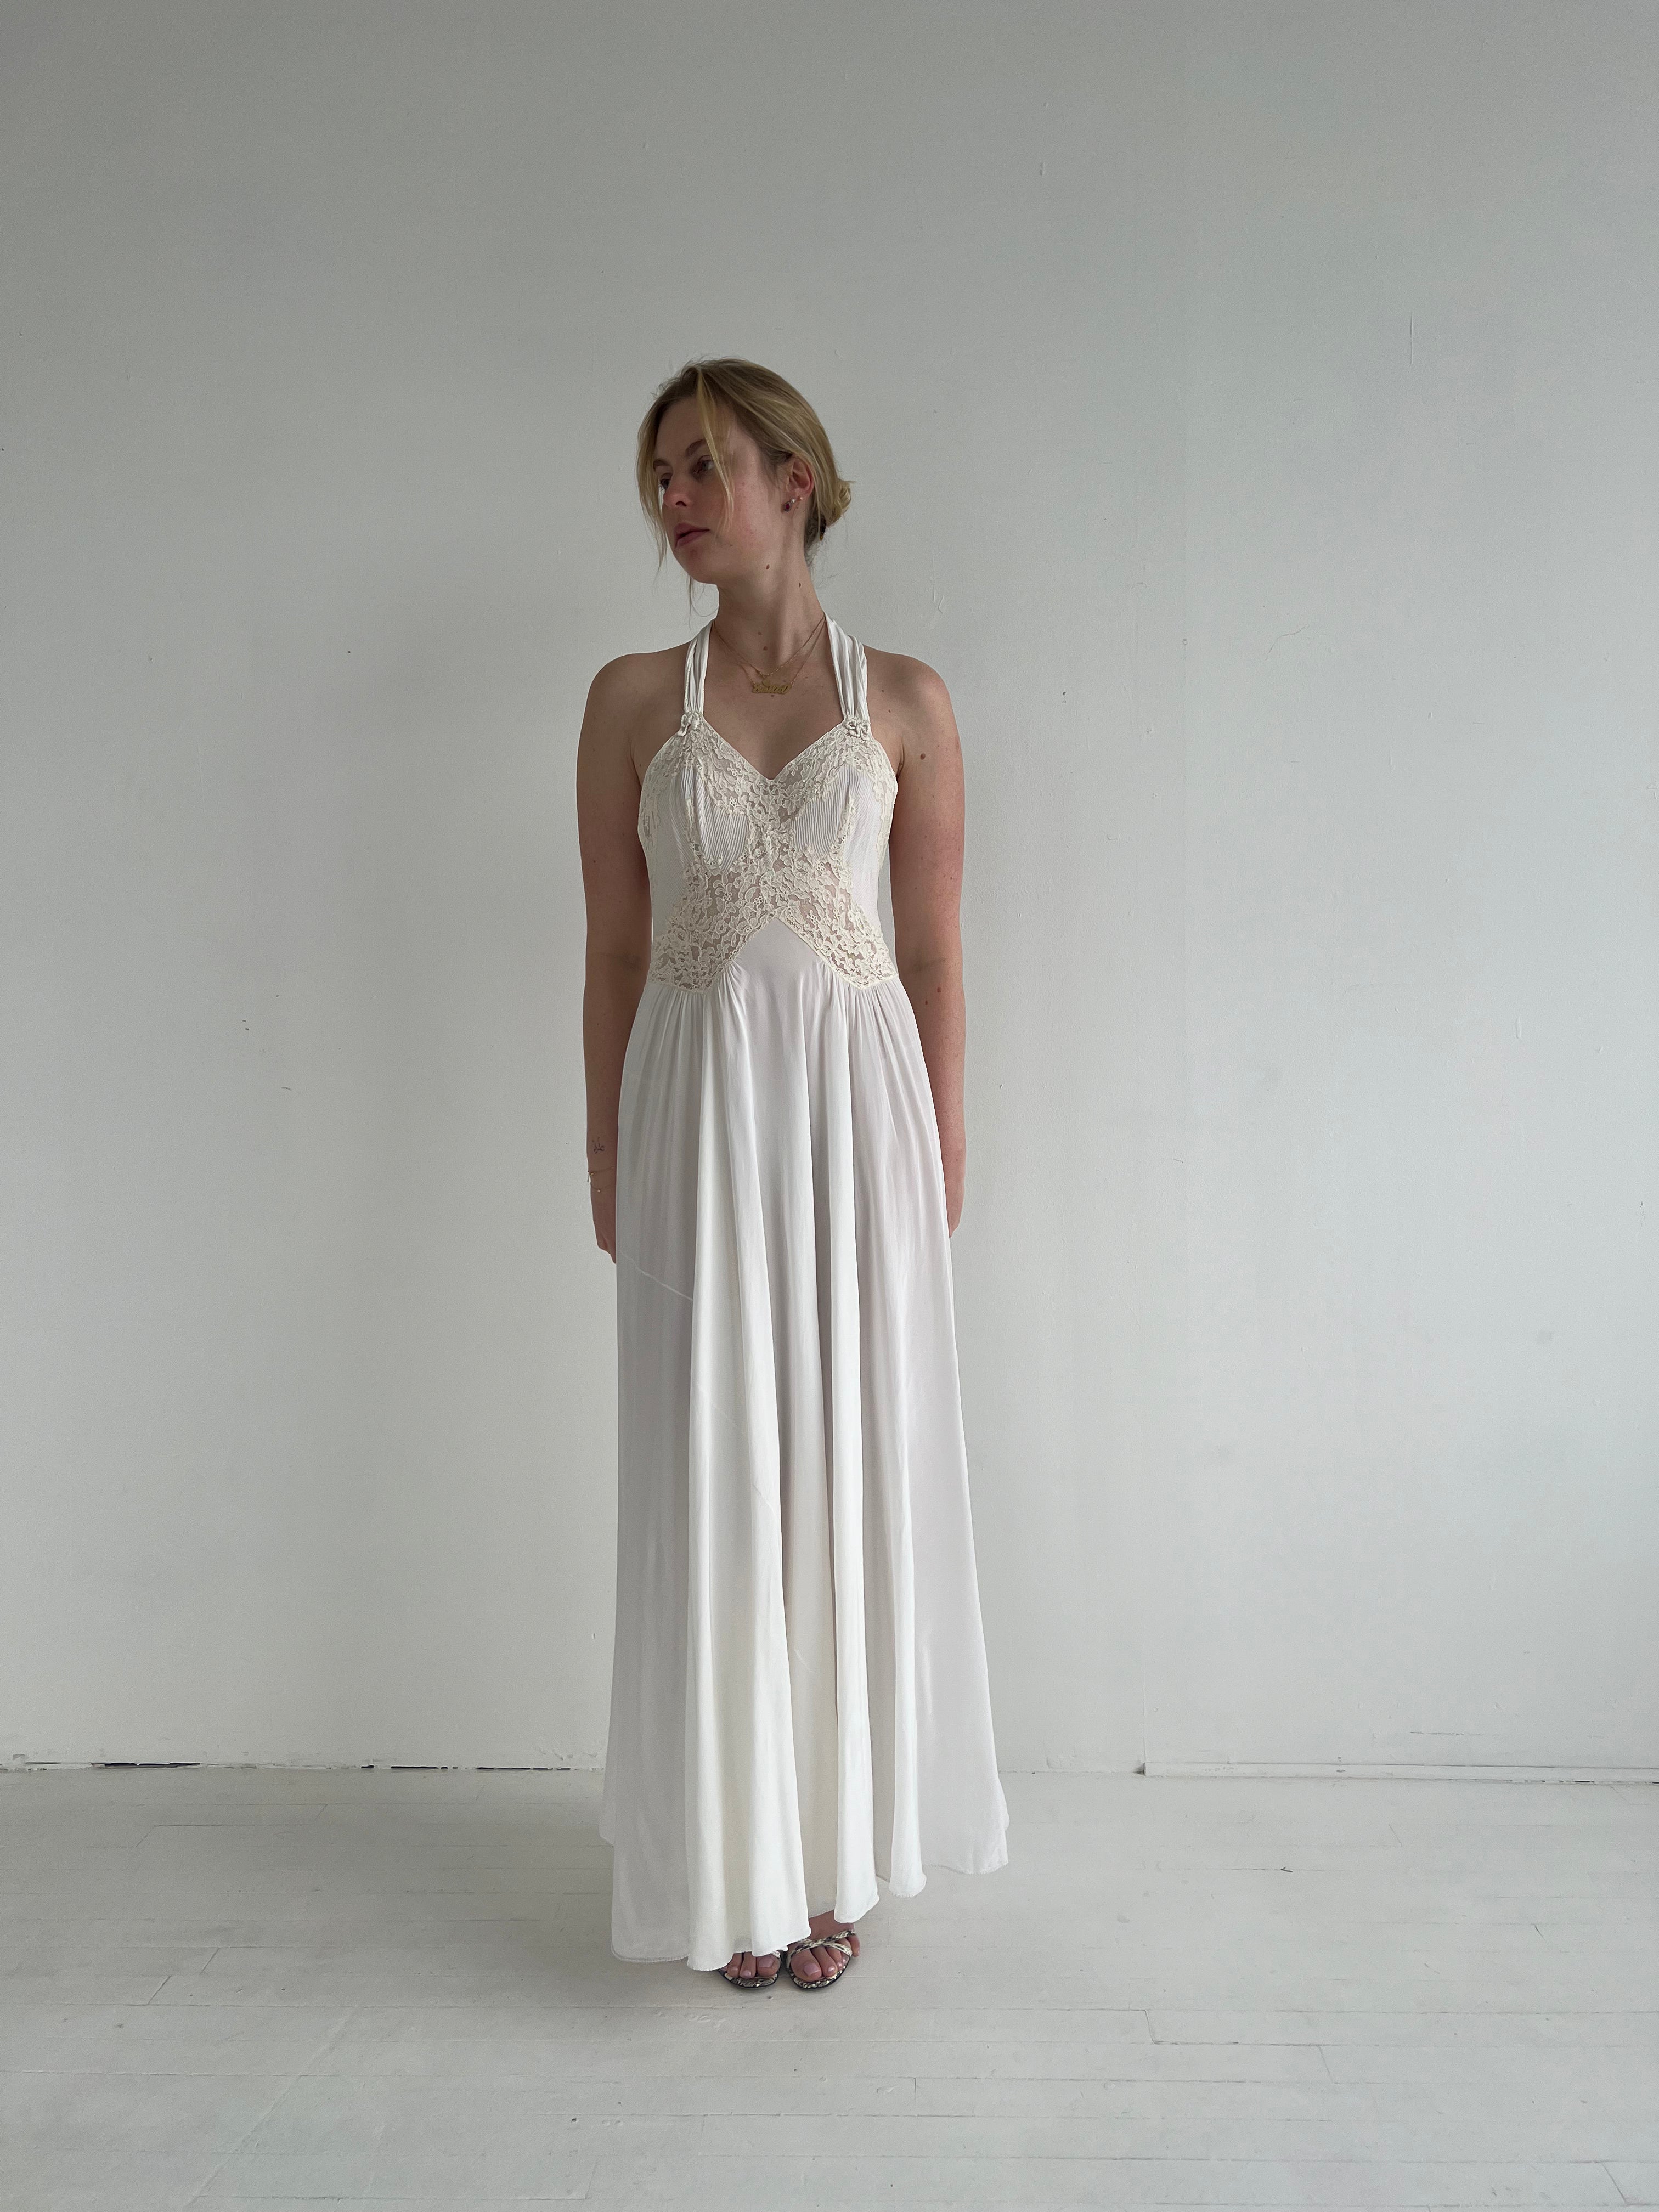 1930's Bridal White Halter Dress with Lace